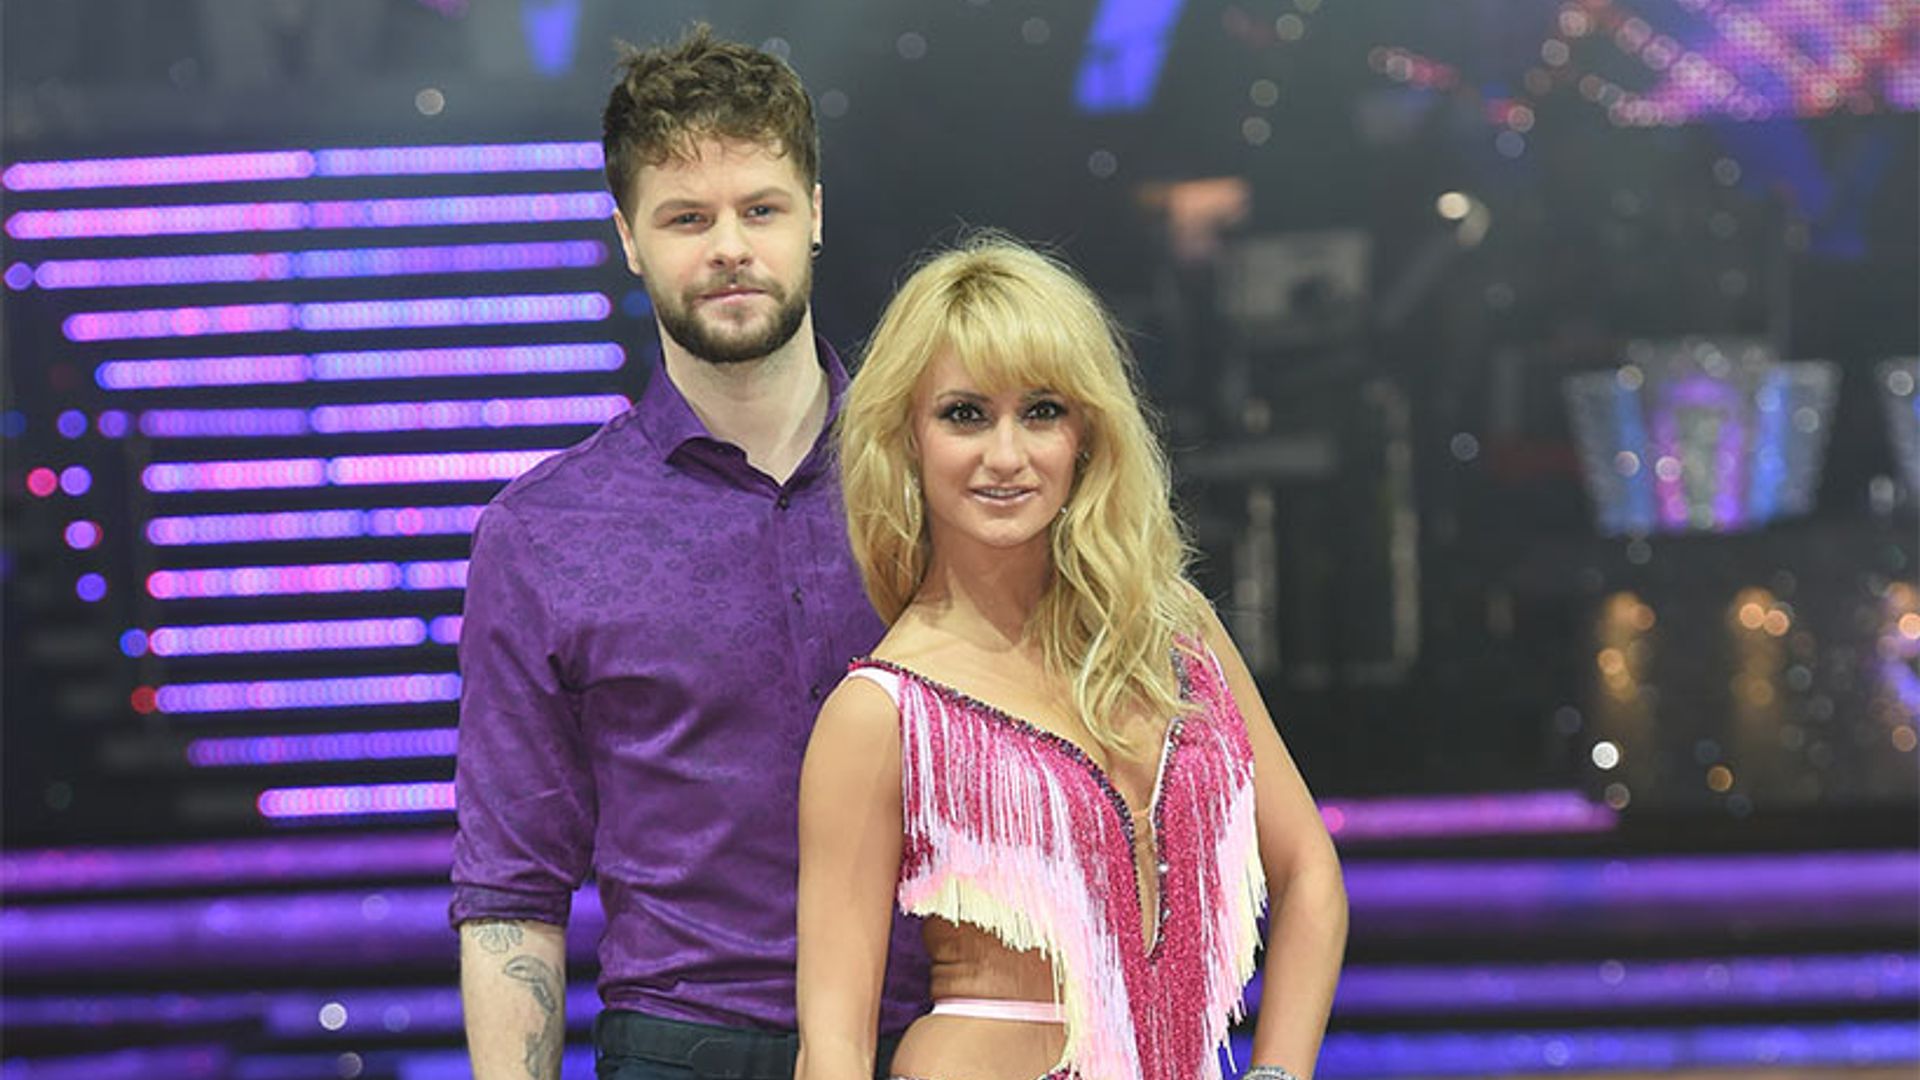 Jay McGuiness on former dance partner Aliona Vilani and why he doesn't believe in the Strictly curse